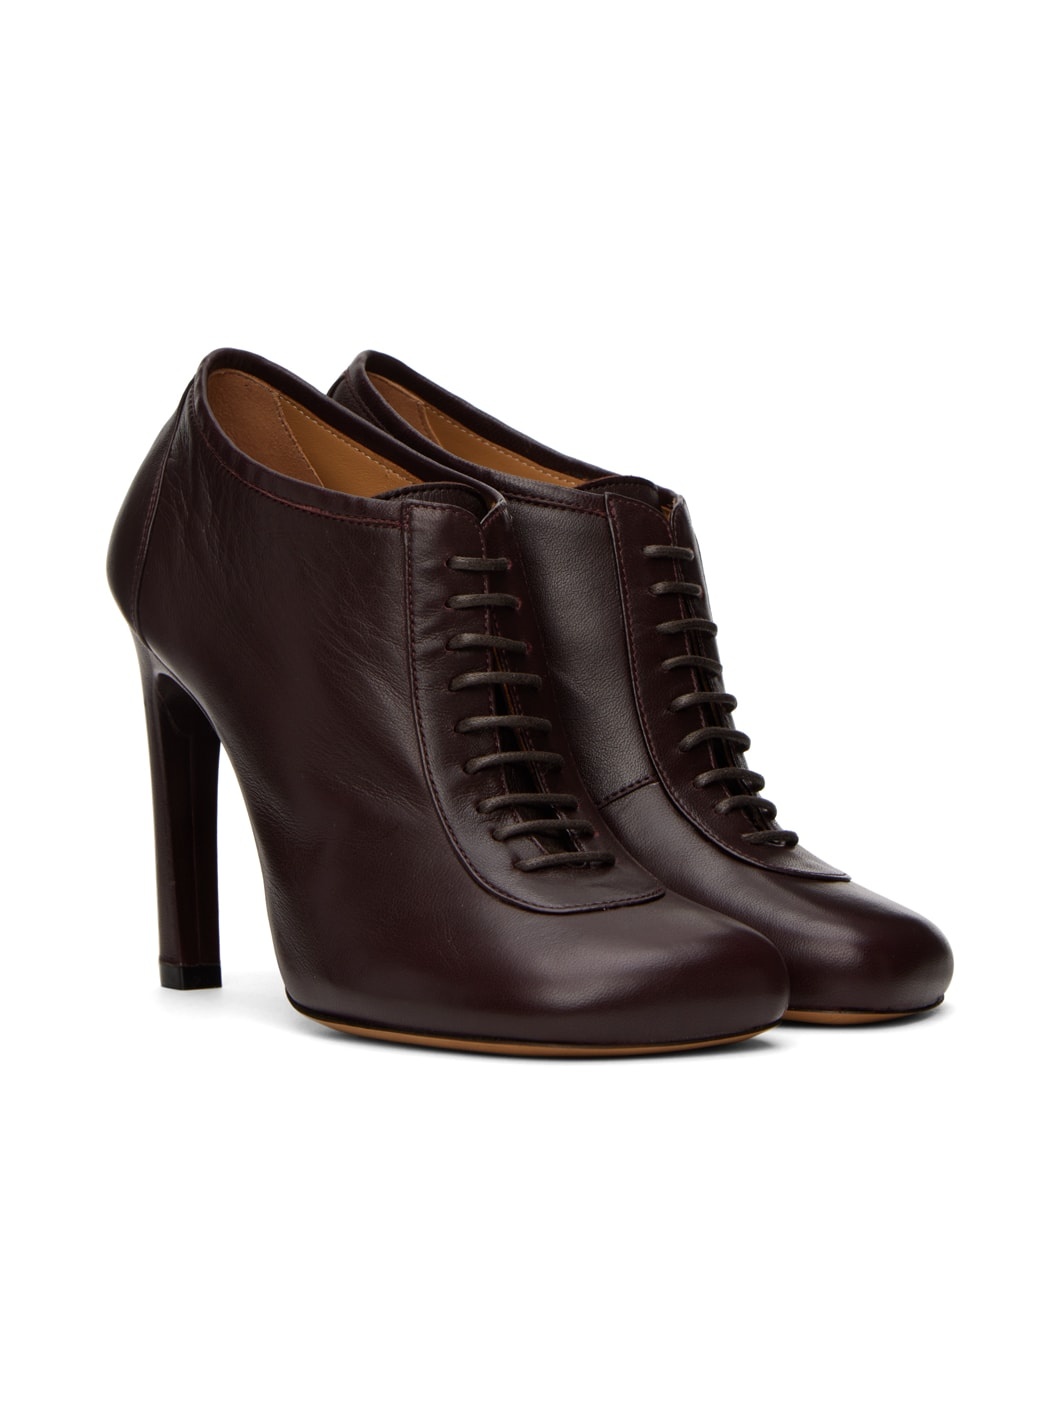 Burgundy Lace-Up Low Ankle Heels - 4